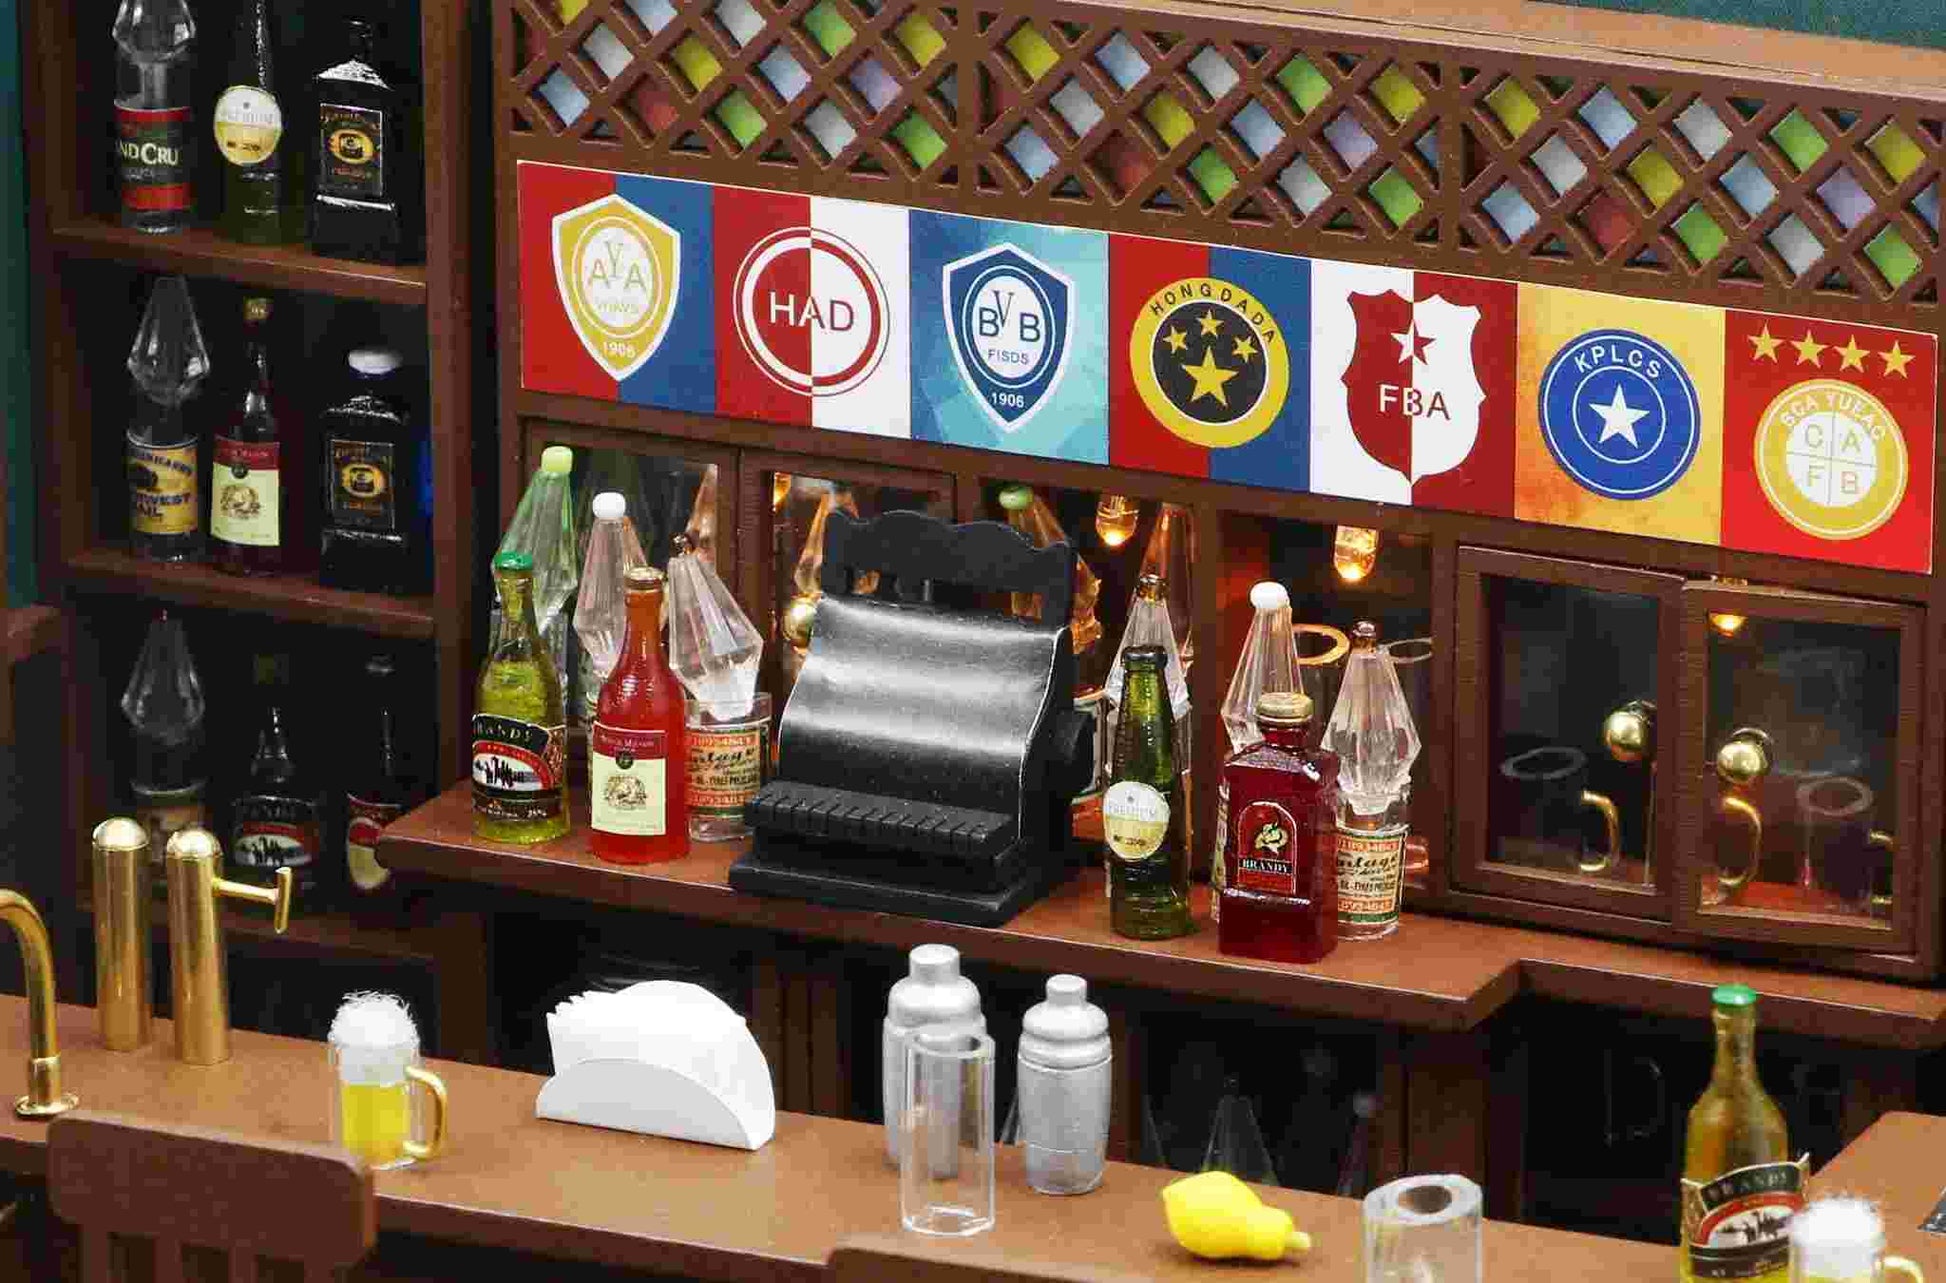 MacLaren's Pub DIY Dollhouse kit, a miniature house crafts inspired by the TV show "How I Met Your Mother", perfect for model building lovers, dollhouse collectors, home decor, A great DIY project for "How I Met Your Mother" fans.